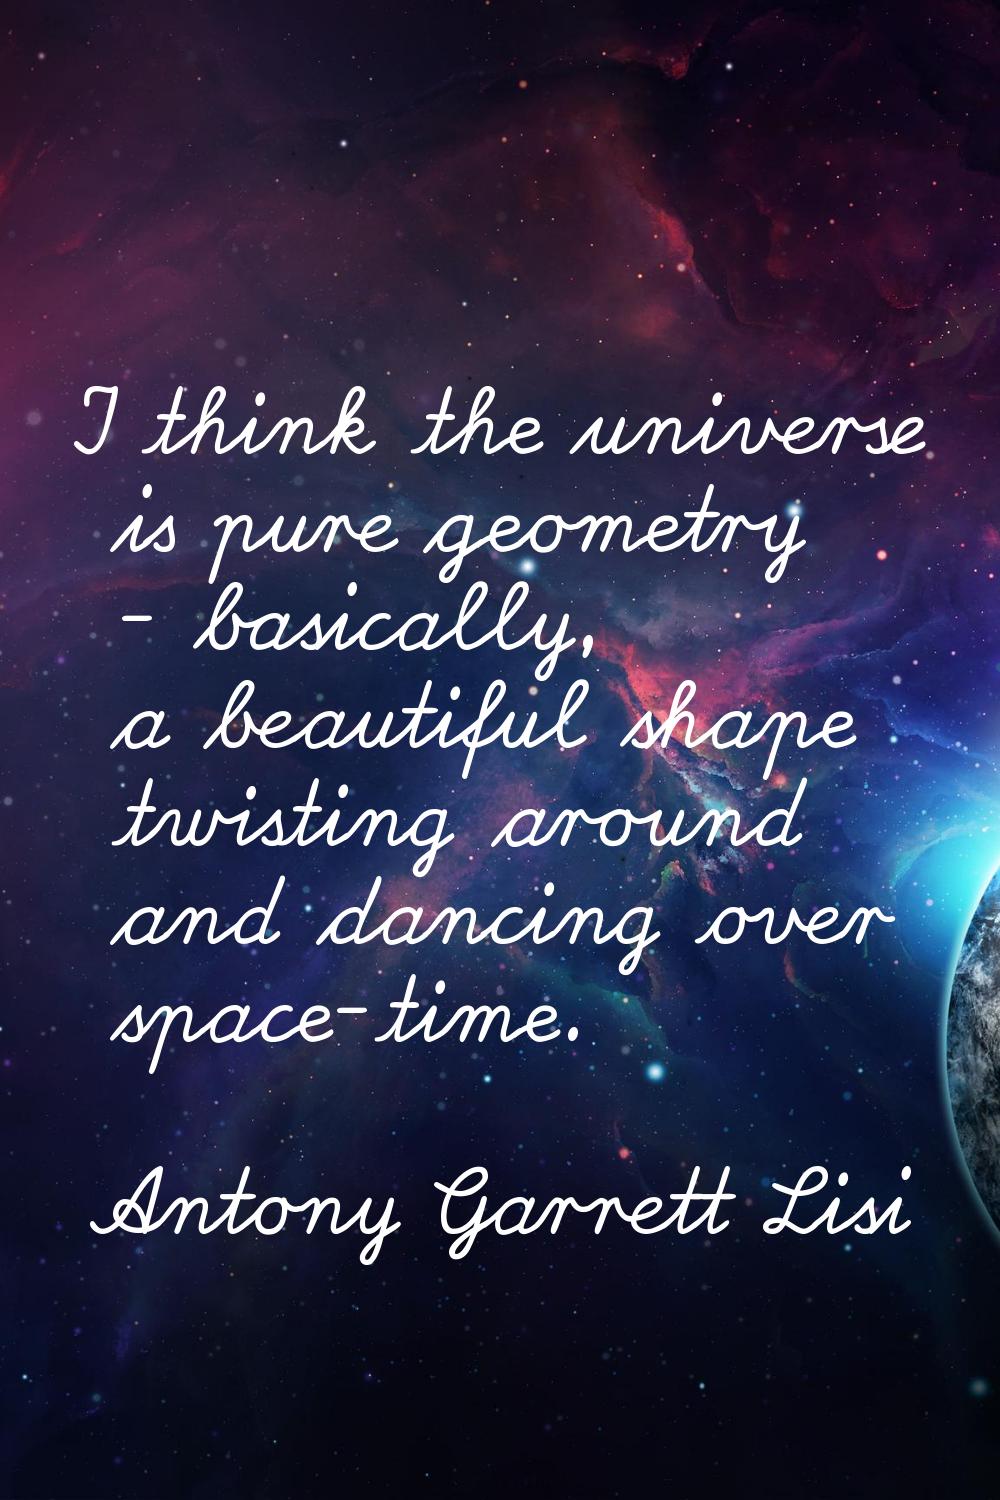 I think the universe is pure geometry - basically, a beautiful shape twisting around and dancing ov